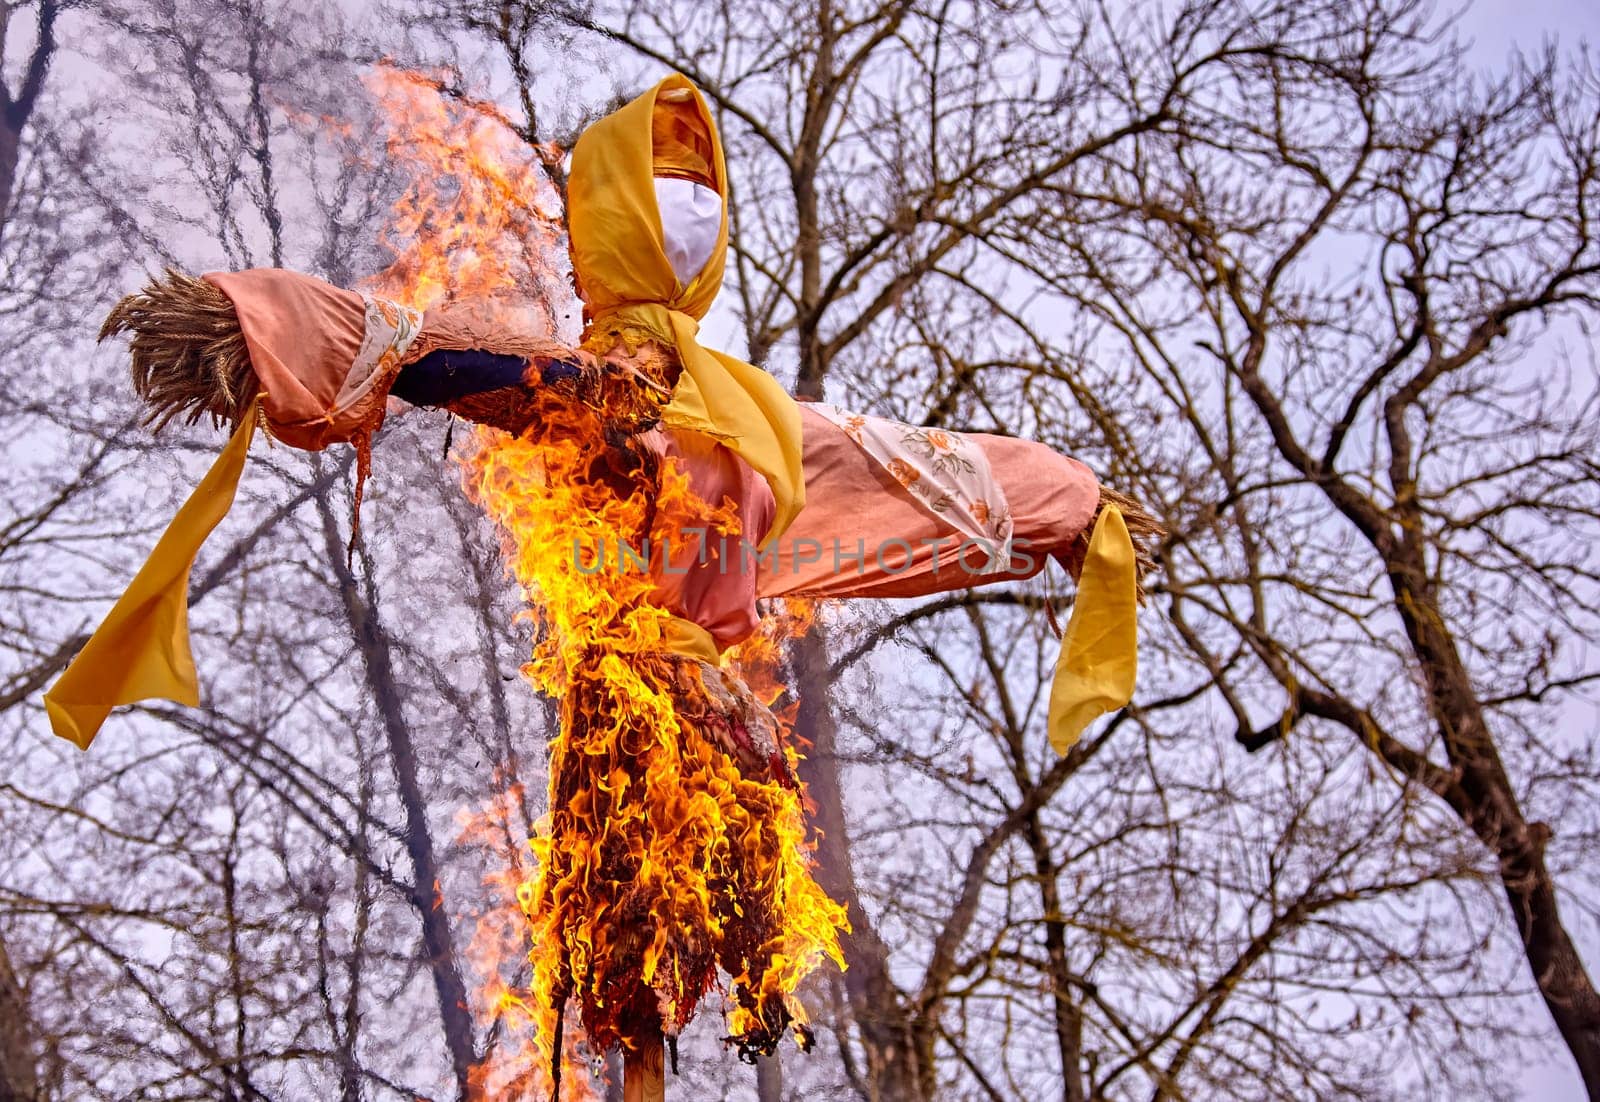 Scarecrow burning symbolizing spring arrival and new beginnings in the countryside with copy space by Hil